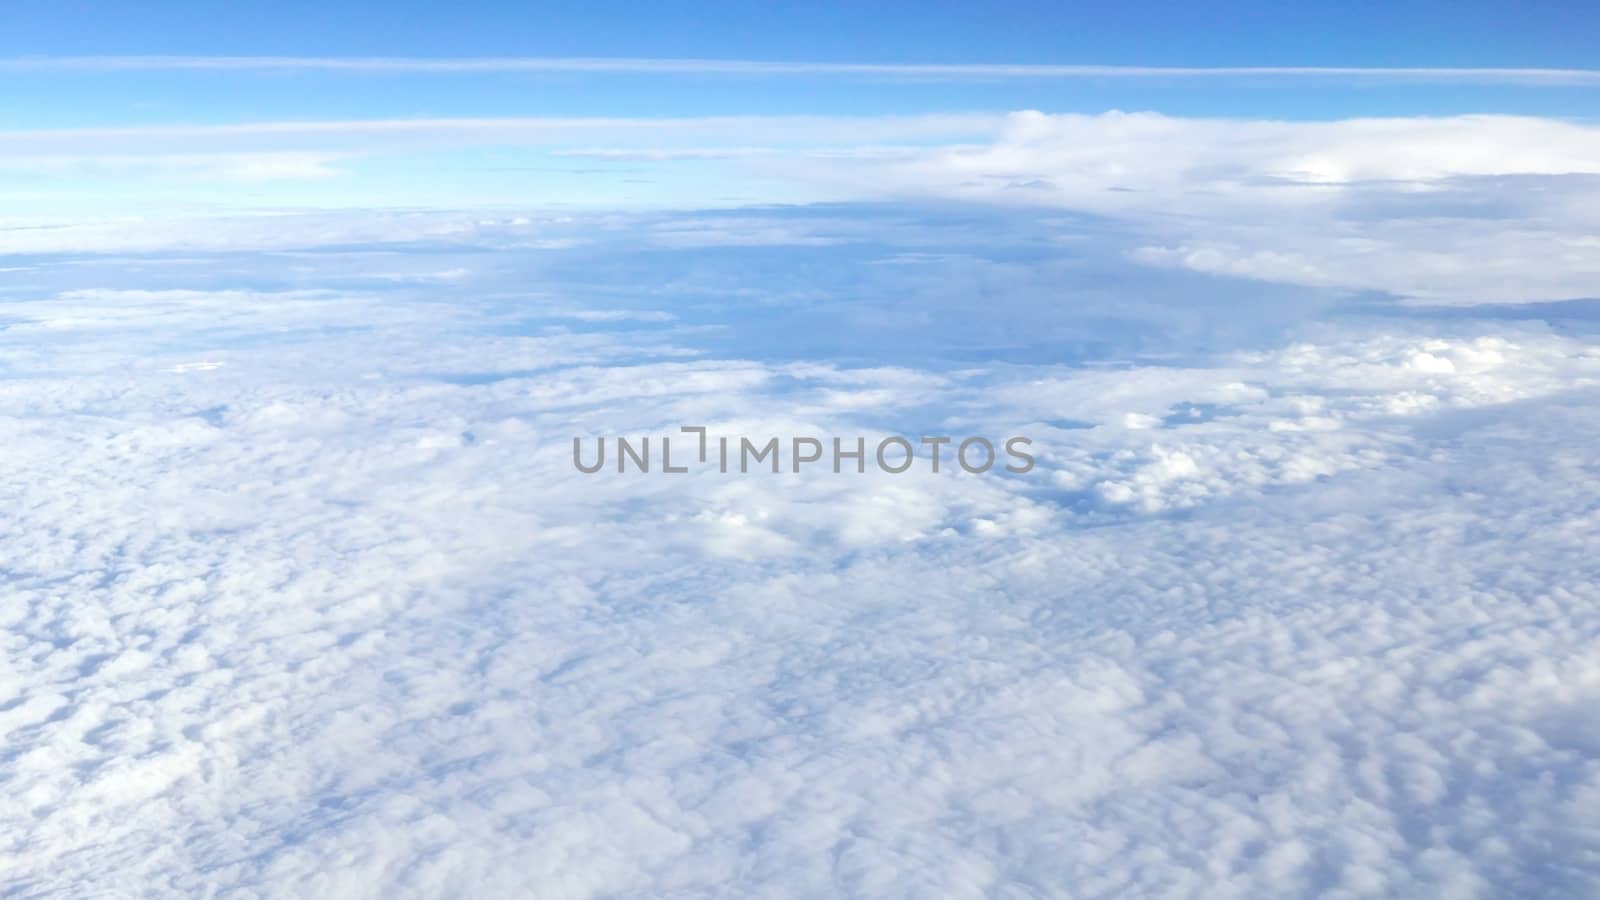 Nice natural clouds in the blue sky from aerial view by cougarsan